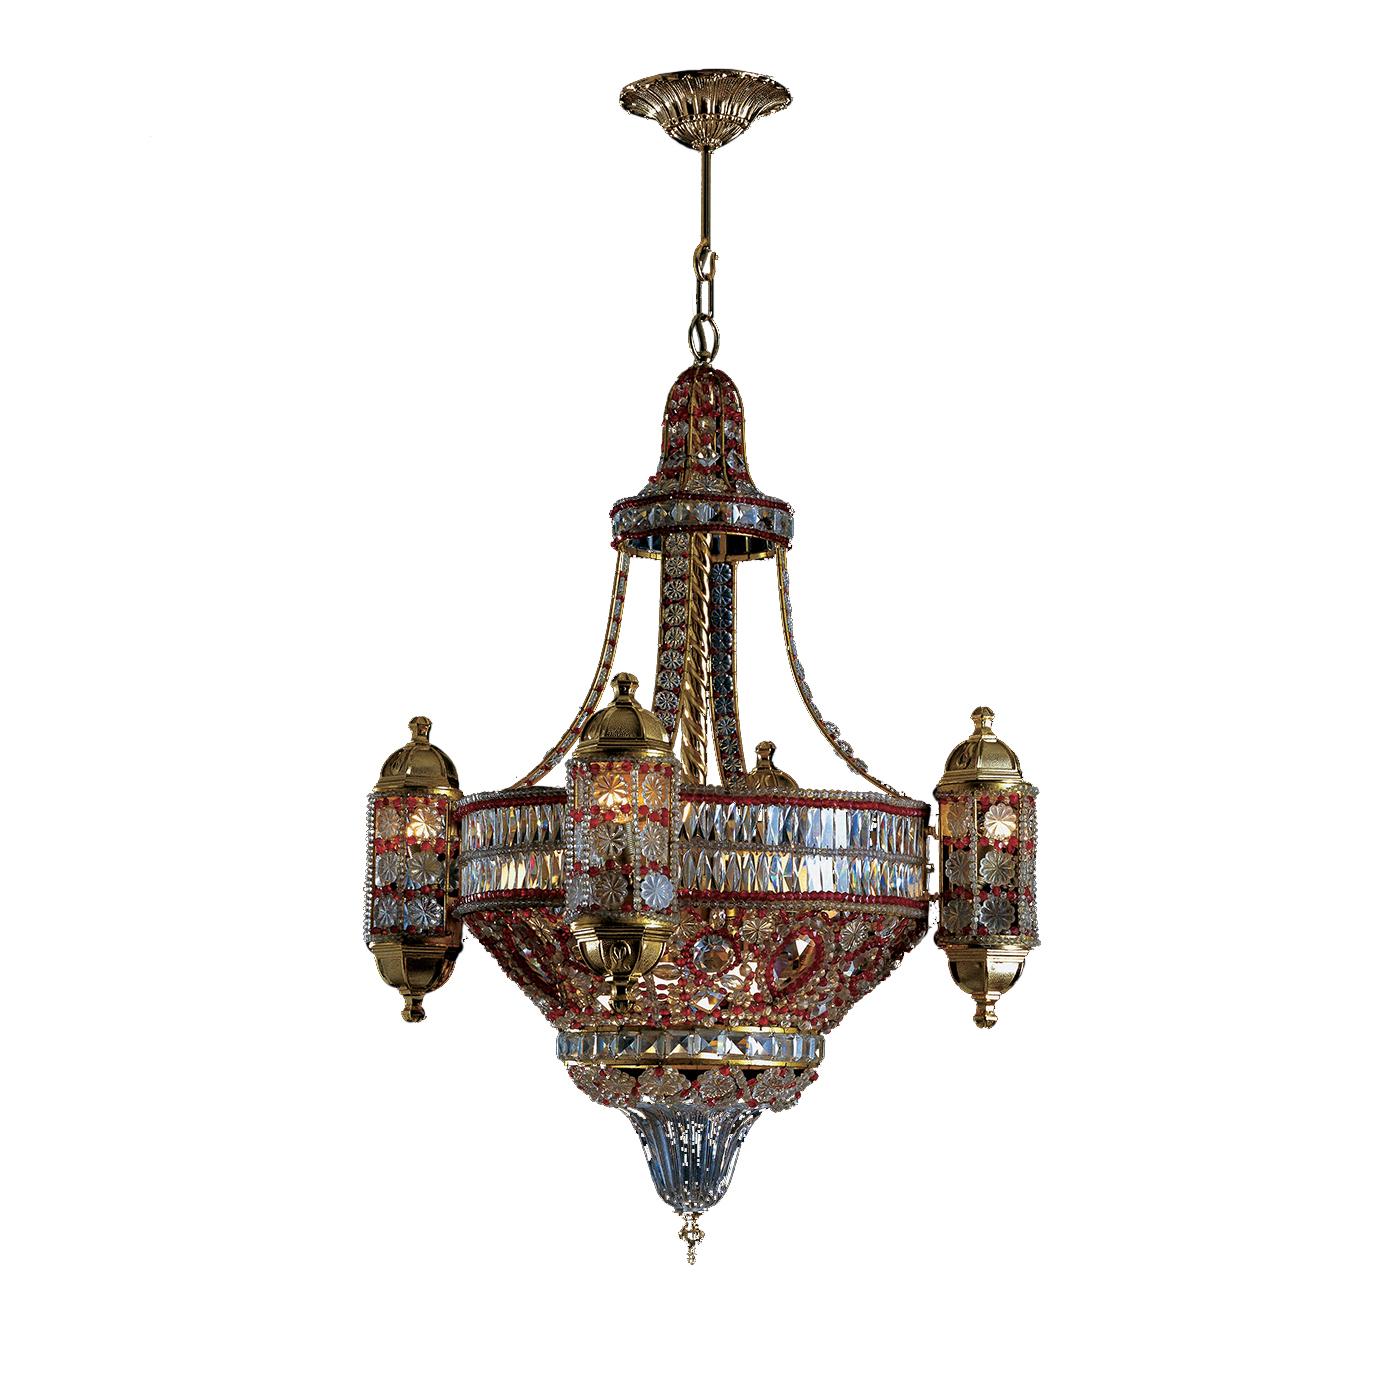 A spectacular piece that will make a statement in any decor, this chandelier combines exotic allure with traditional craftsmanship, for a final effect that is luxurious and sophisticated. Its complex structure, featuring a top element with a